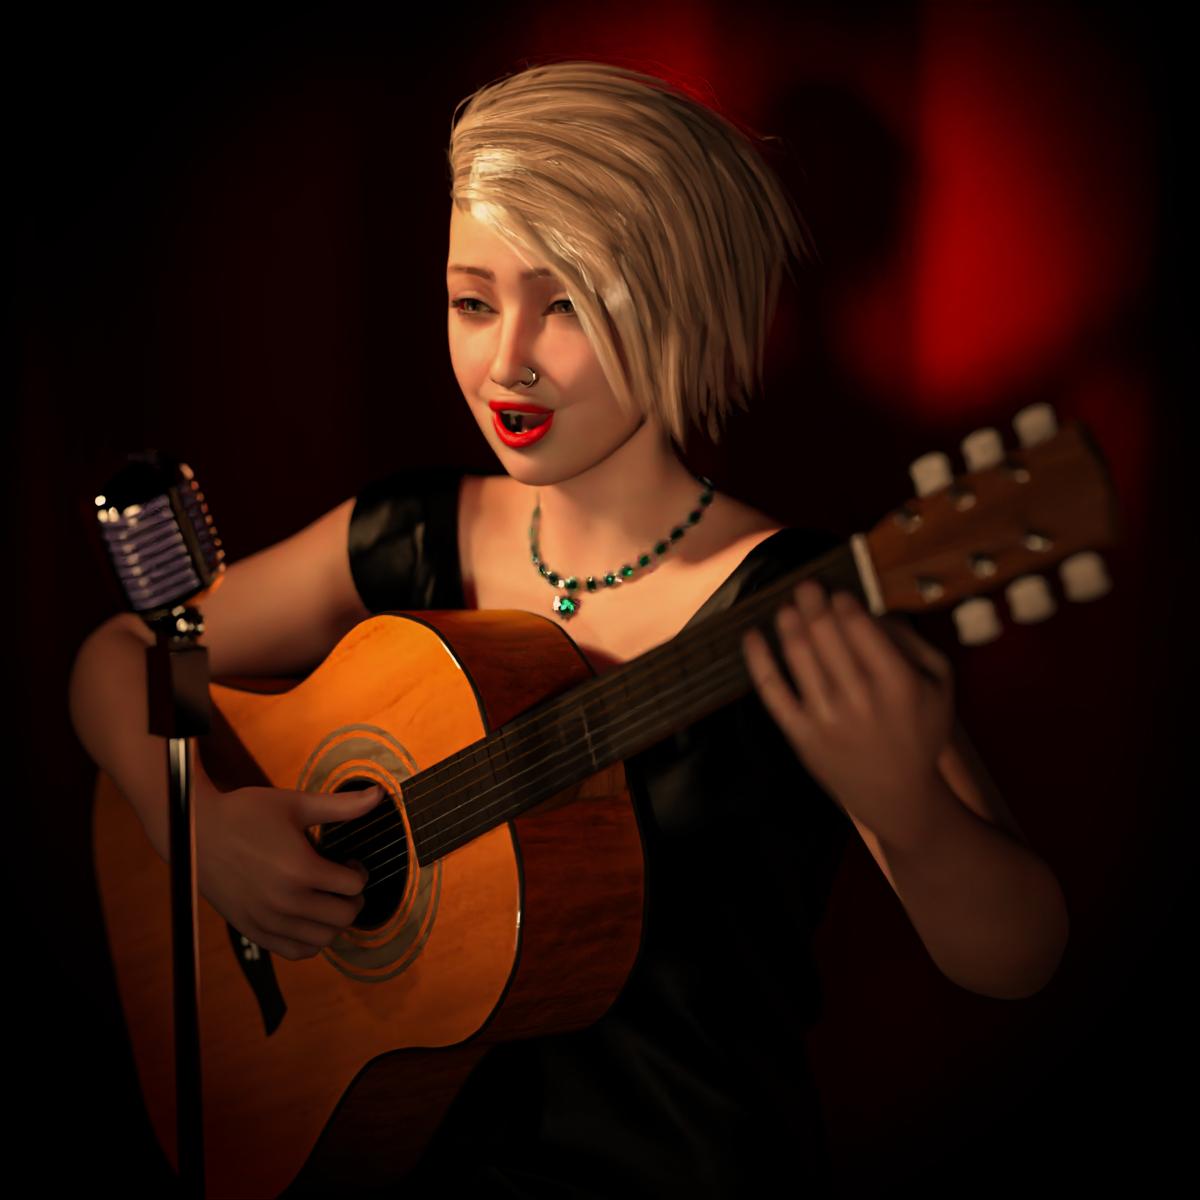 Pixeles — Guitar N°2 poses SFS x11 Poses (4 single and 7...